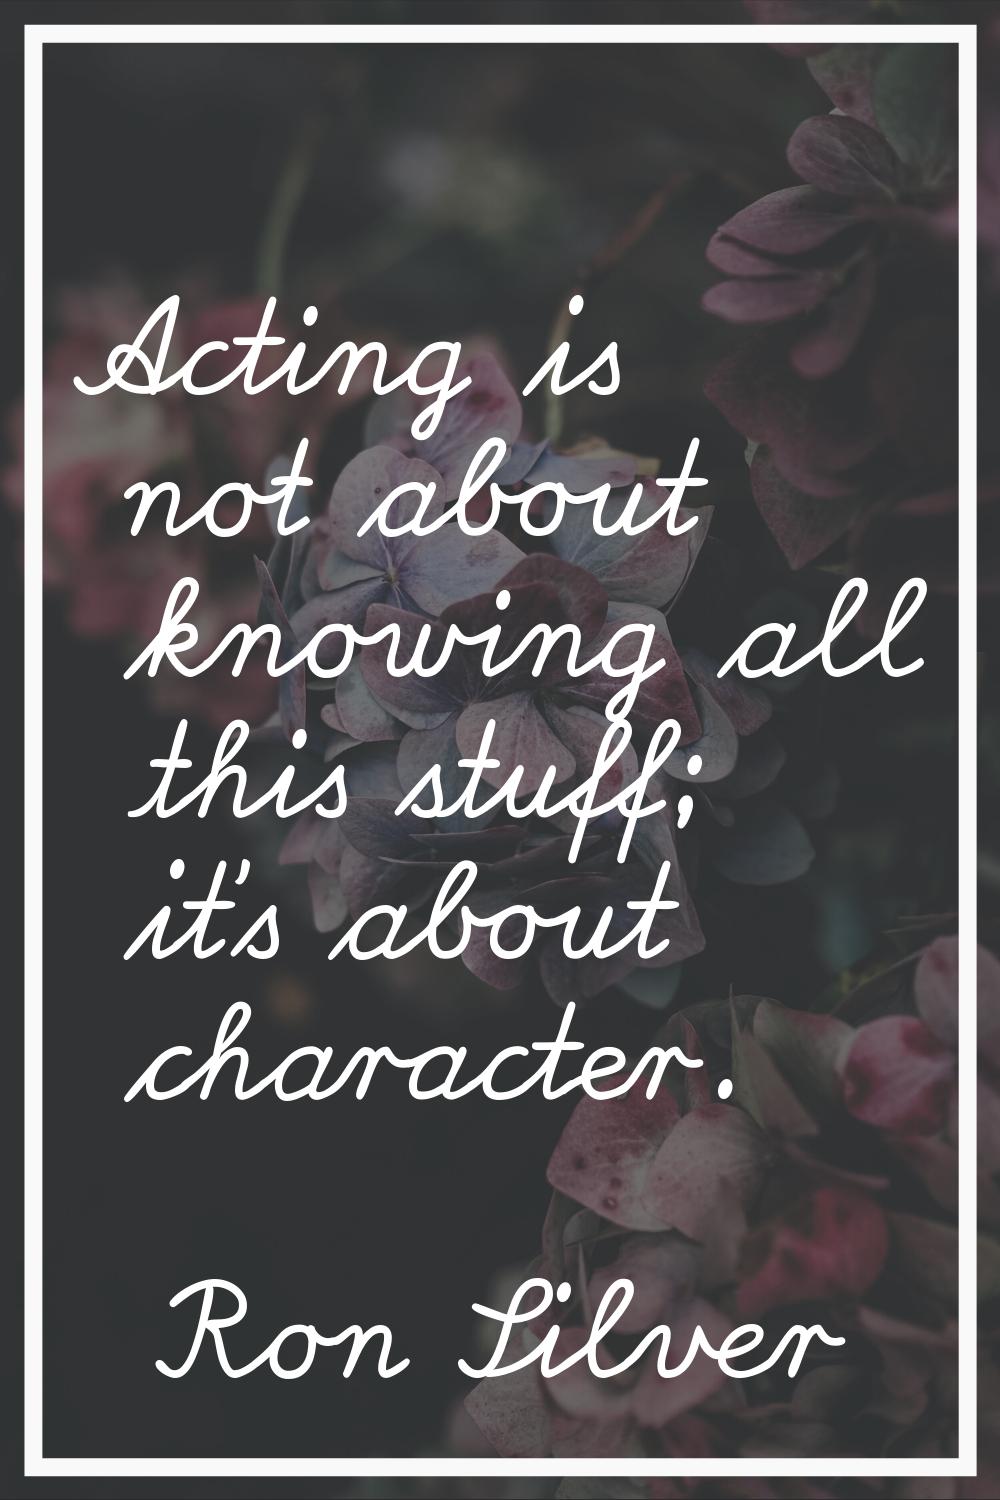 Acting is not about knowing all this stuff; it's about character.